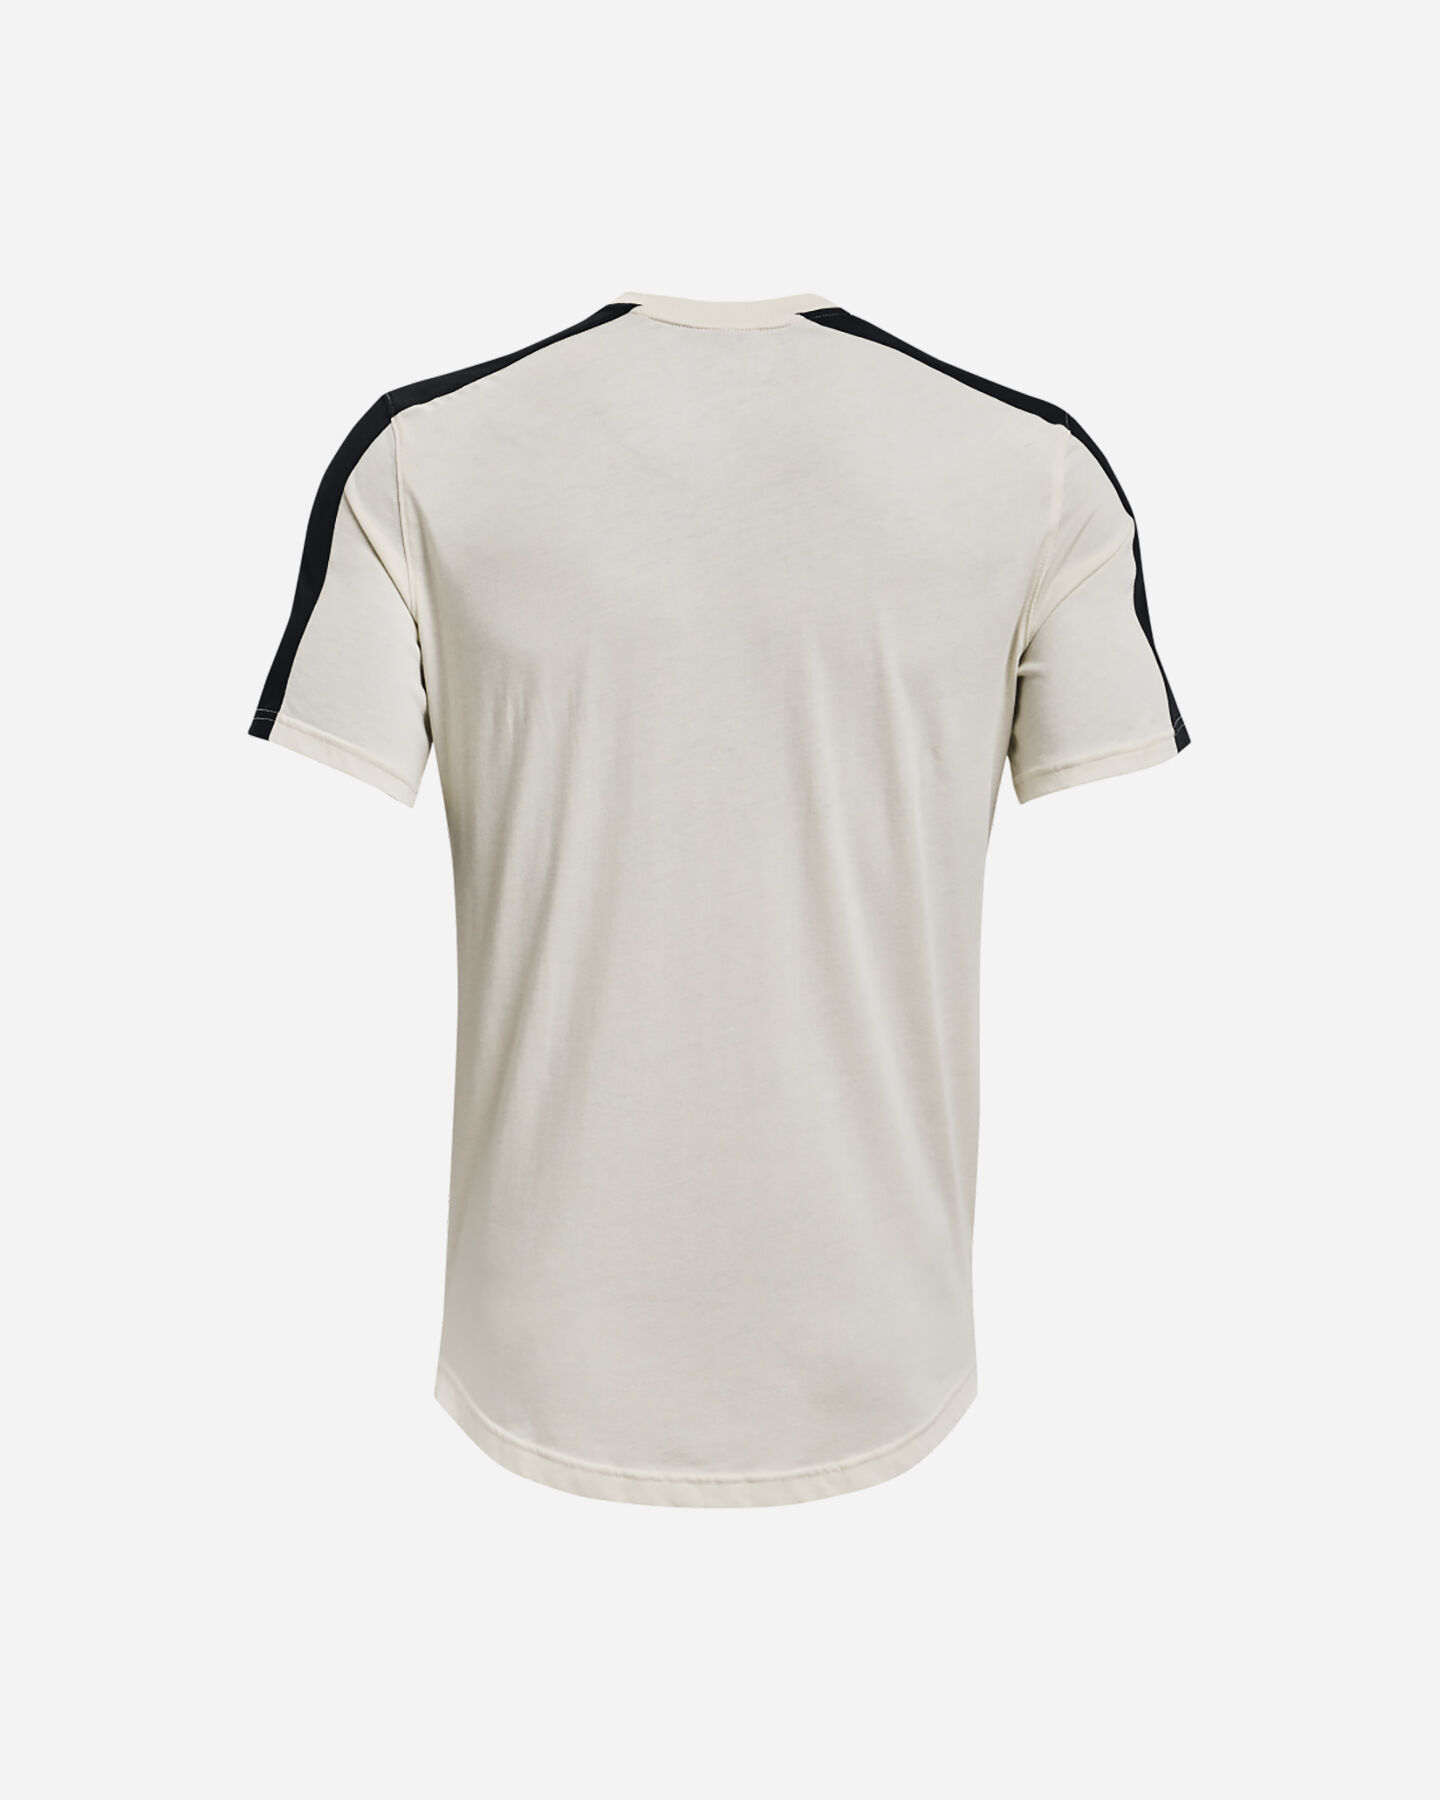  T-Shirt UNDER ARMOUR ATHLET POCKET M S5390701|0279|XS scatto 1